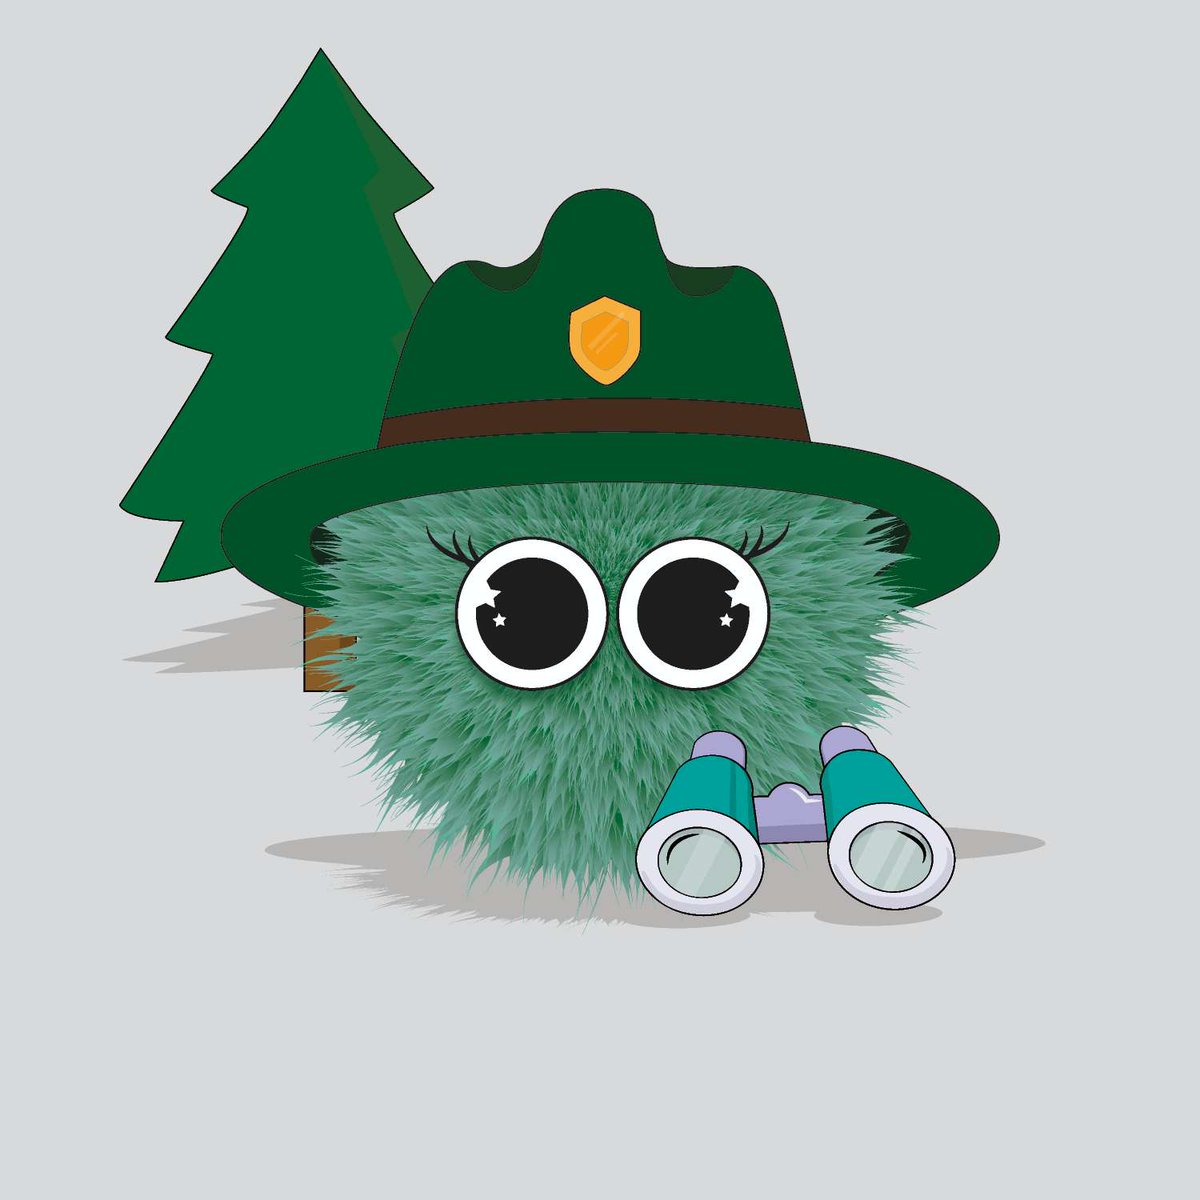 Good morning my lovely family 🌄

💚The Golow 👉🏻 #35
🤎Name 👉🏻 Forest Ranger Golow 👮🏻‍♀️🌲
💚Price 👉🏻 10 #MATIC

🏙️Come to visit #bigolowcity to grab your favorite Golow from various jobs✨ 
#opensea
opensea.io/assets/matic/0…

#NFTCommunity #SupportEachOthers